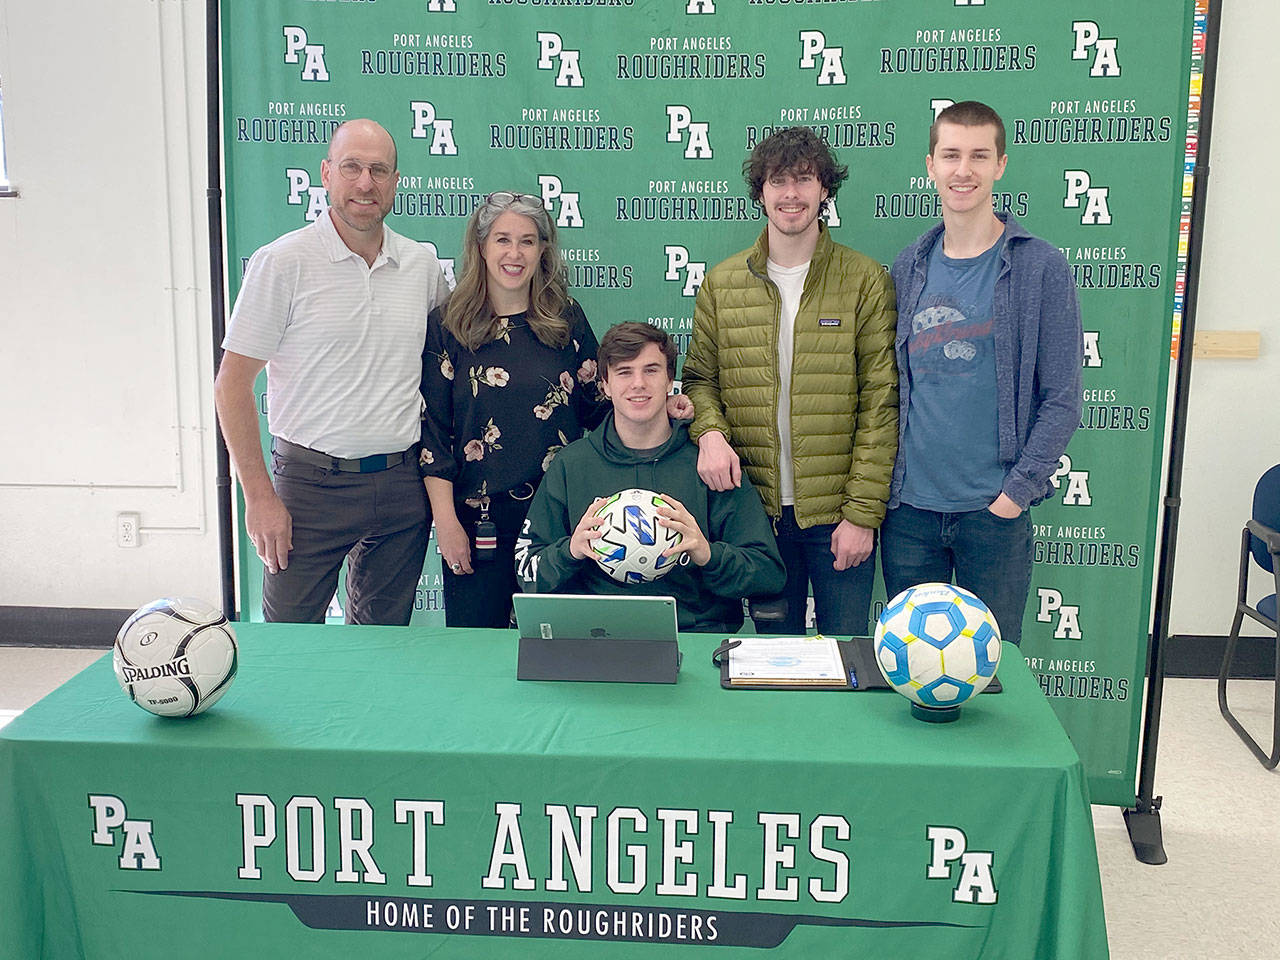 Port Angeles senior Stuart Methner, center, signs a letter of intent to play soccer at the University of Puget Sound. He is joined at the ceremony by, from left, his father Steve, mother Sarah, and brothers Andrew and Scott. All three Methner boys were Roughrider soccer team captains during their high school careers.